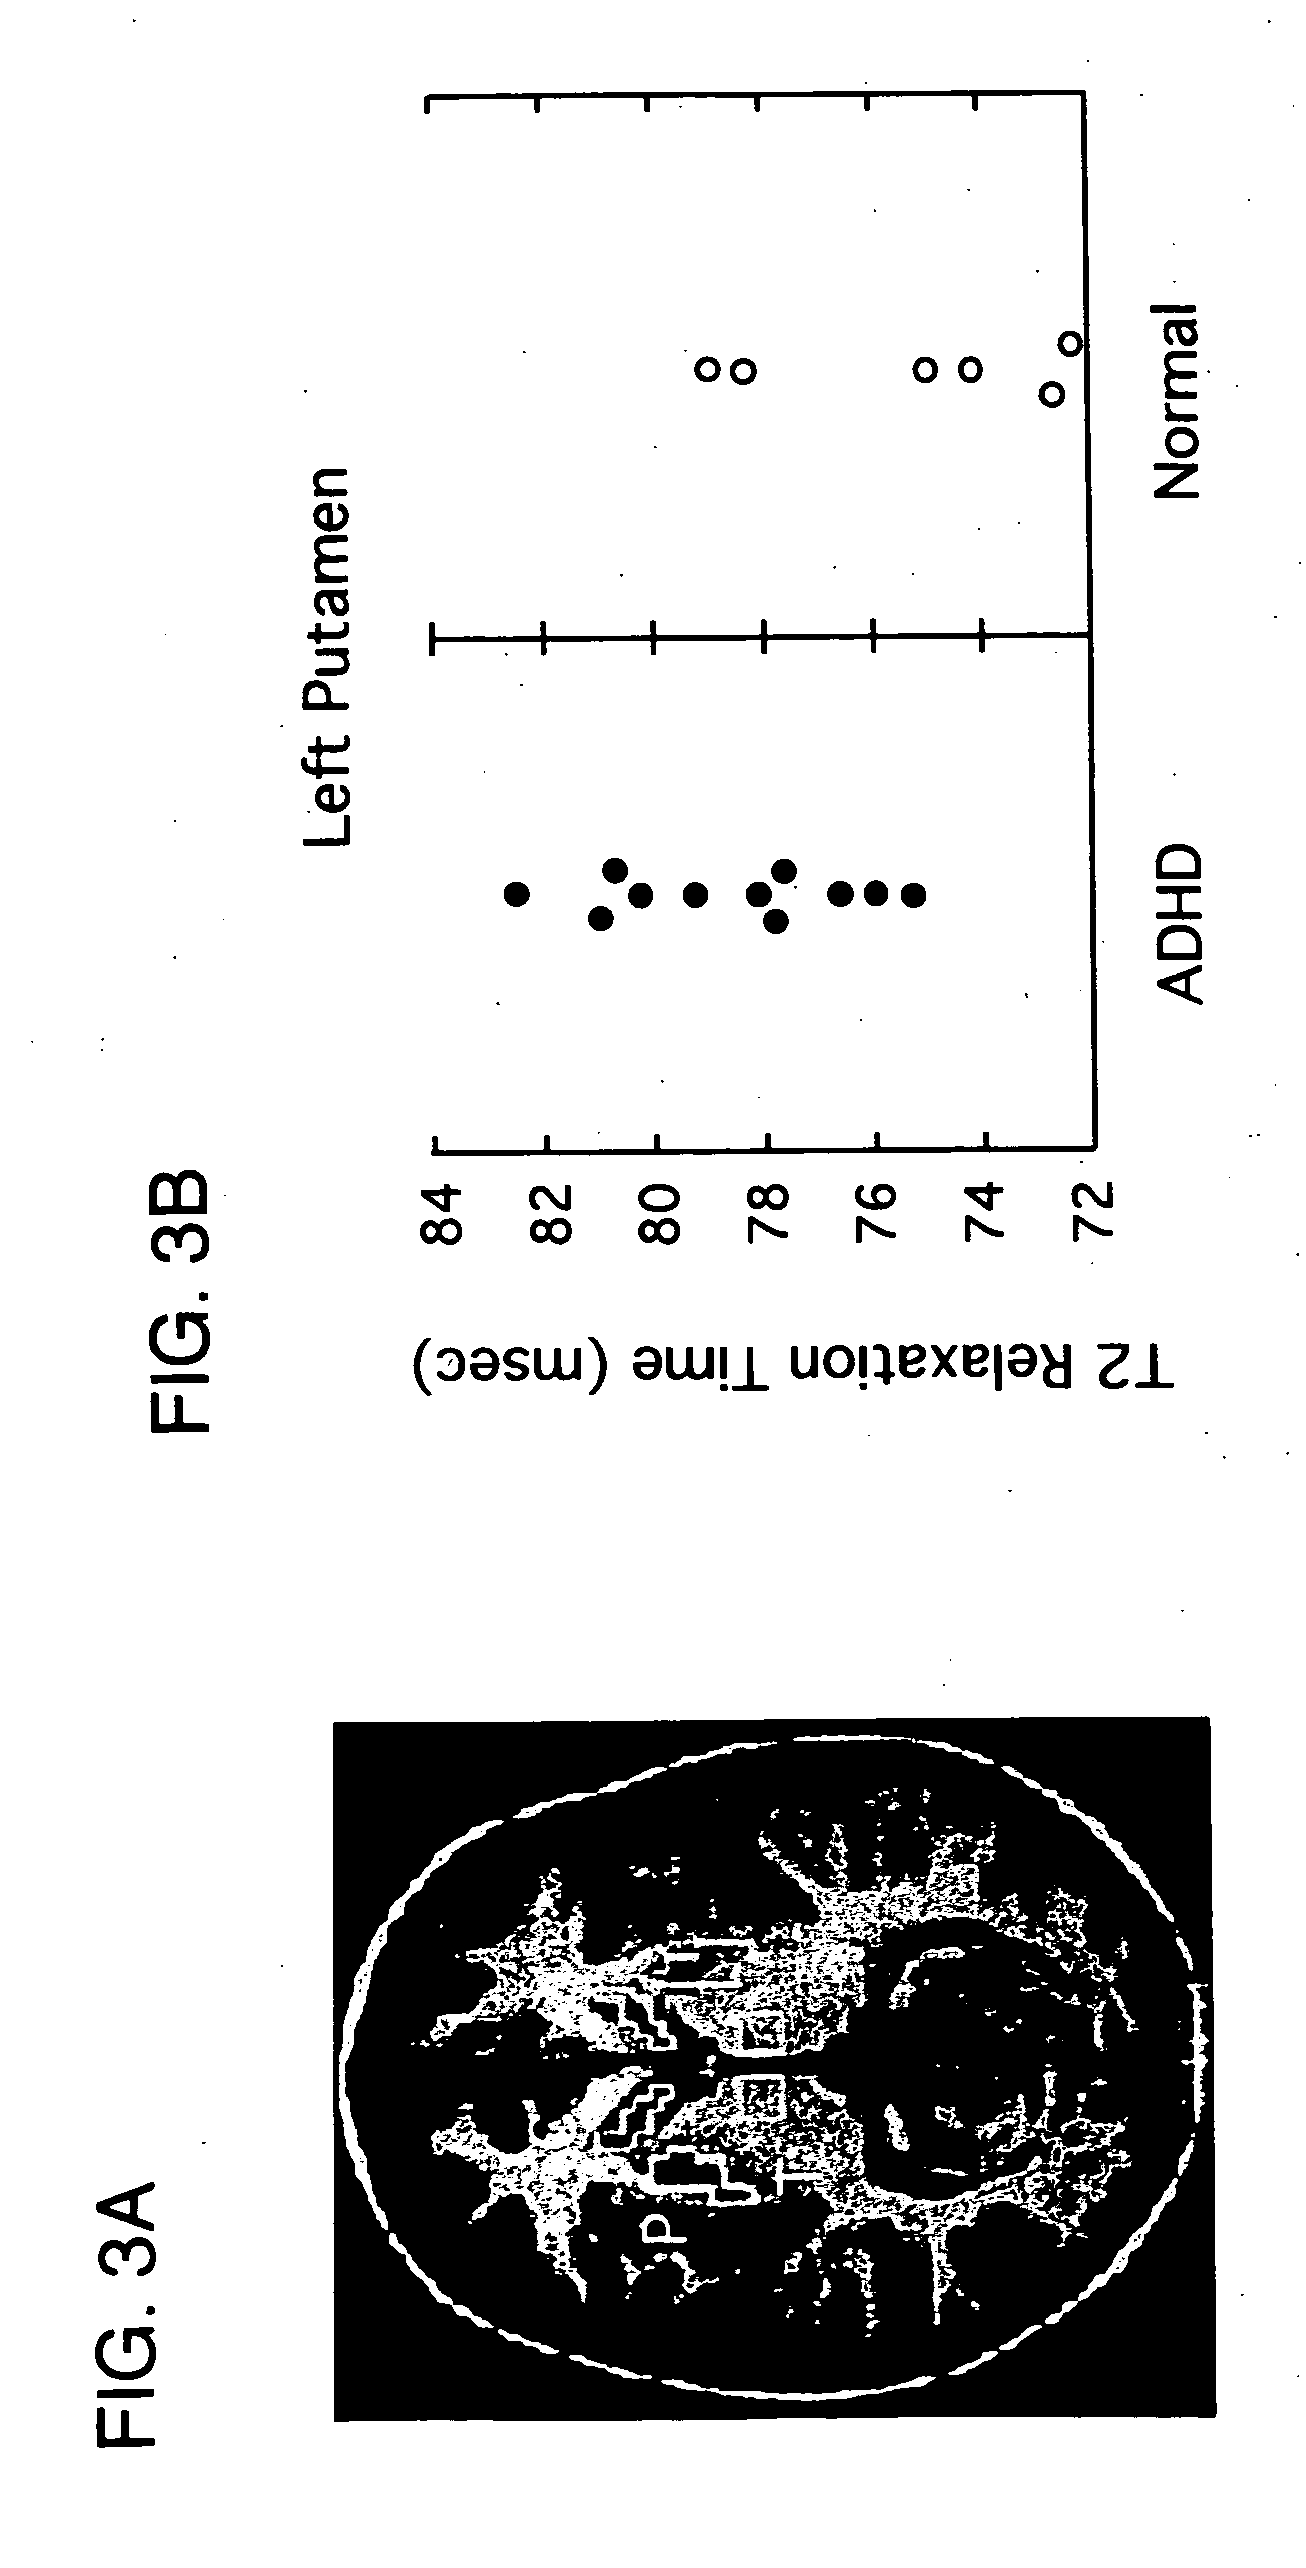 Methods of treating psychiatric substance abuse, and other disorders using combinations containing omega-3 fatty acids